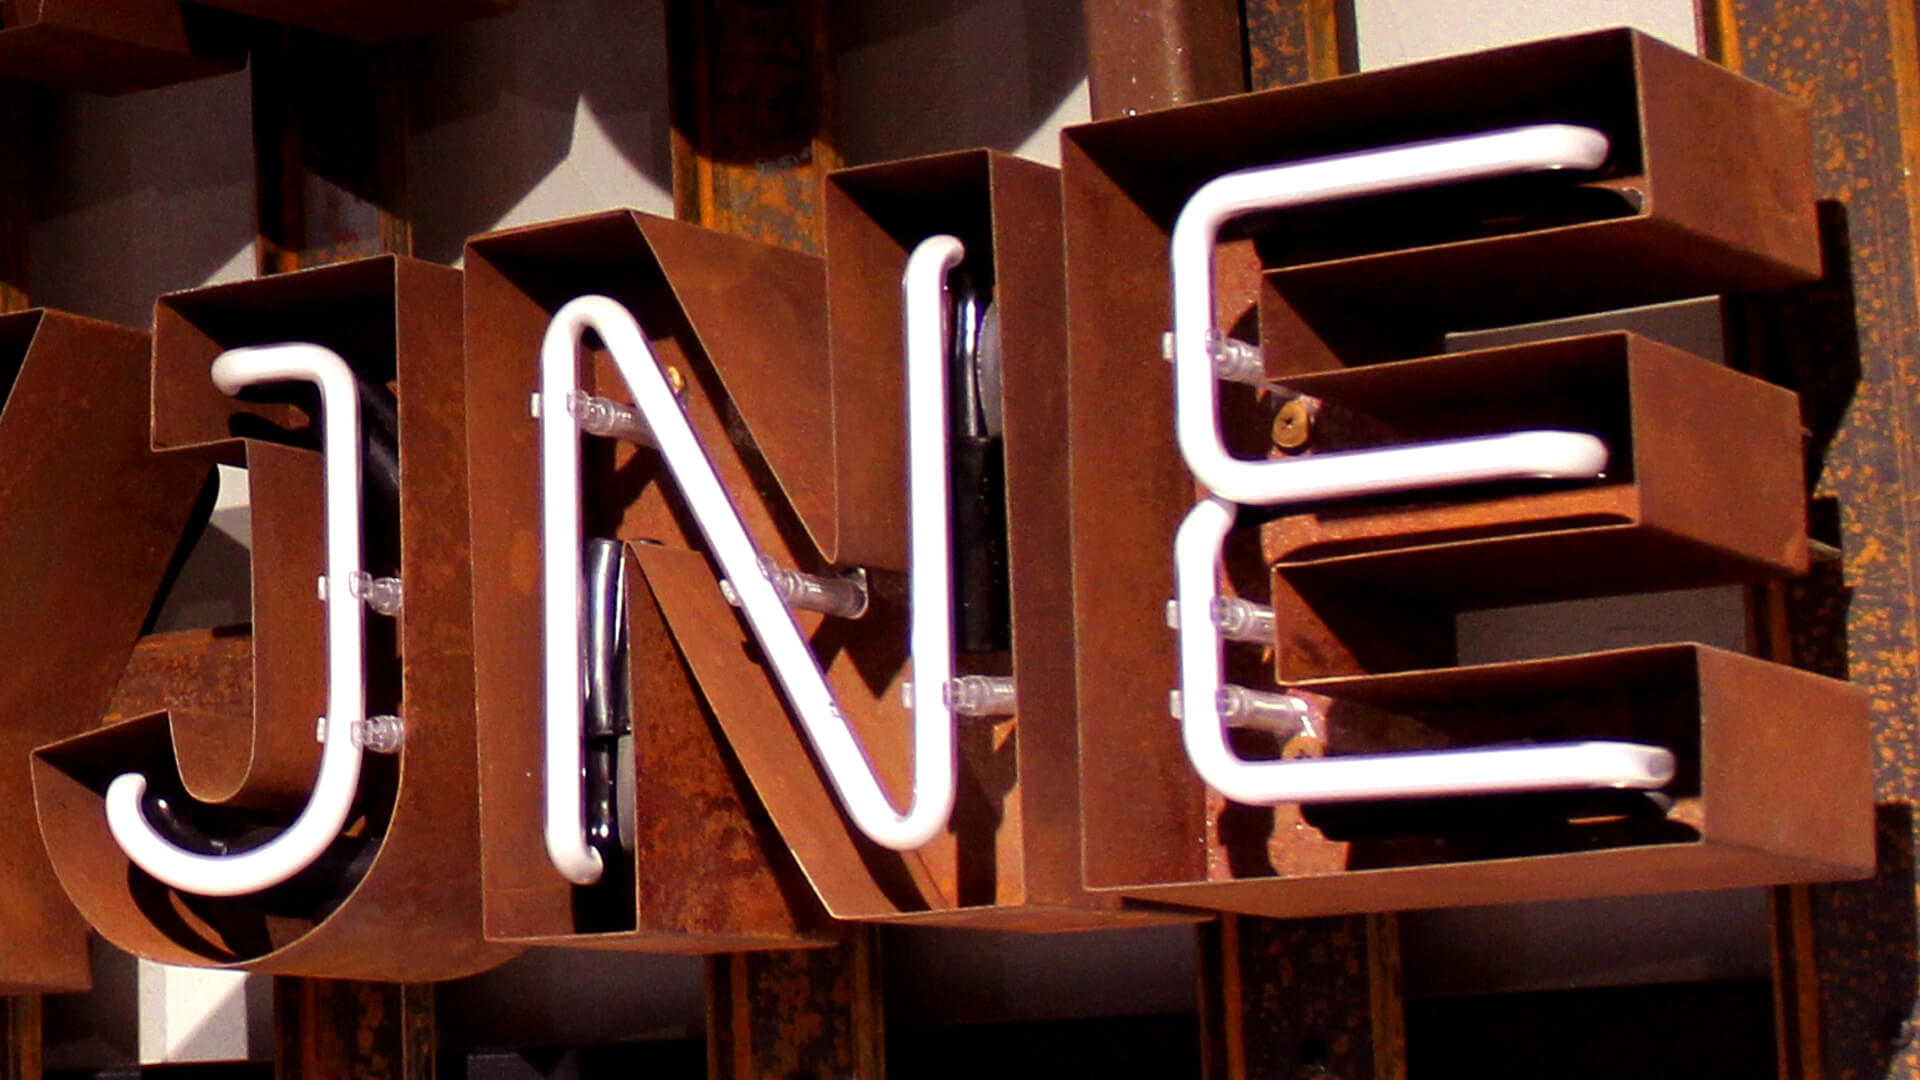 Rusted sheet metal letters with neon interior